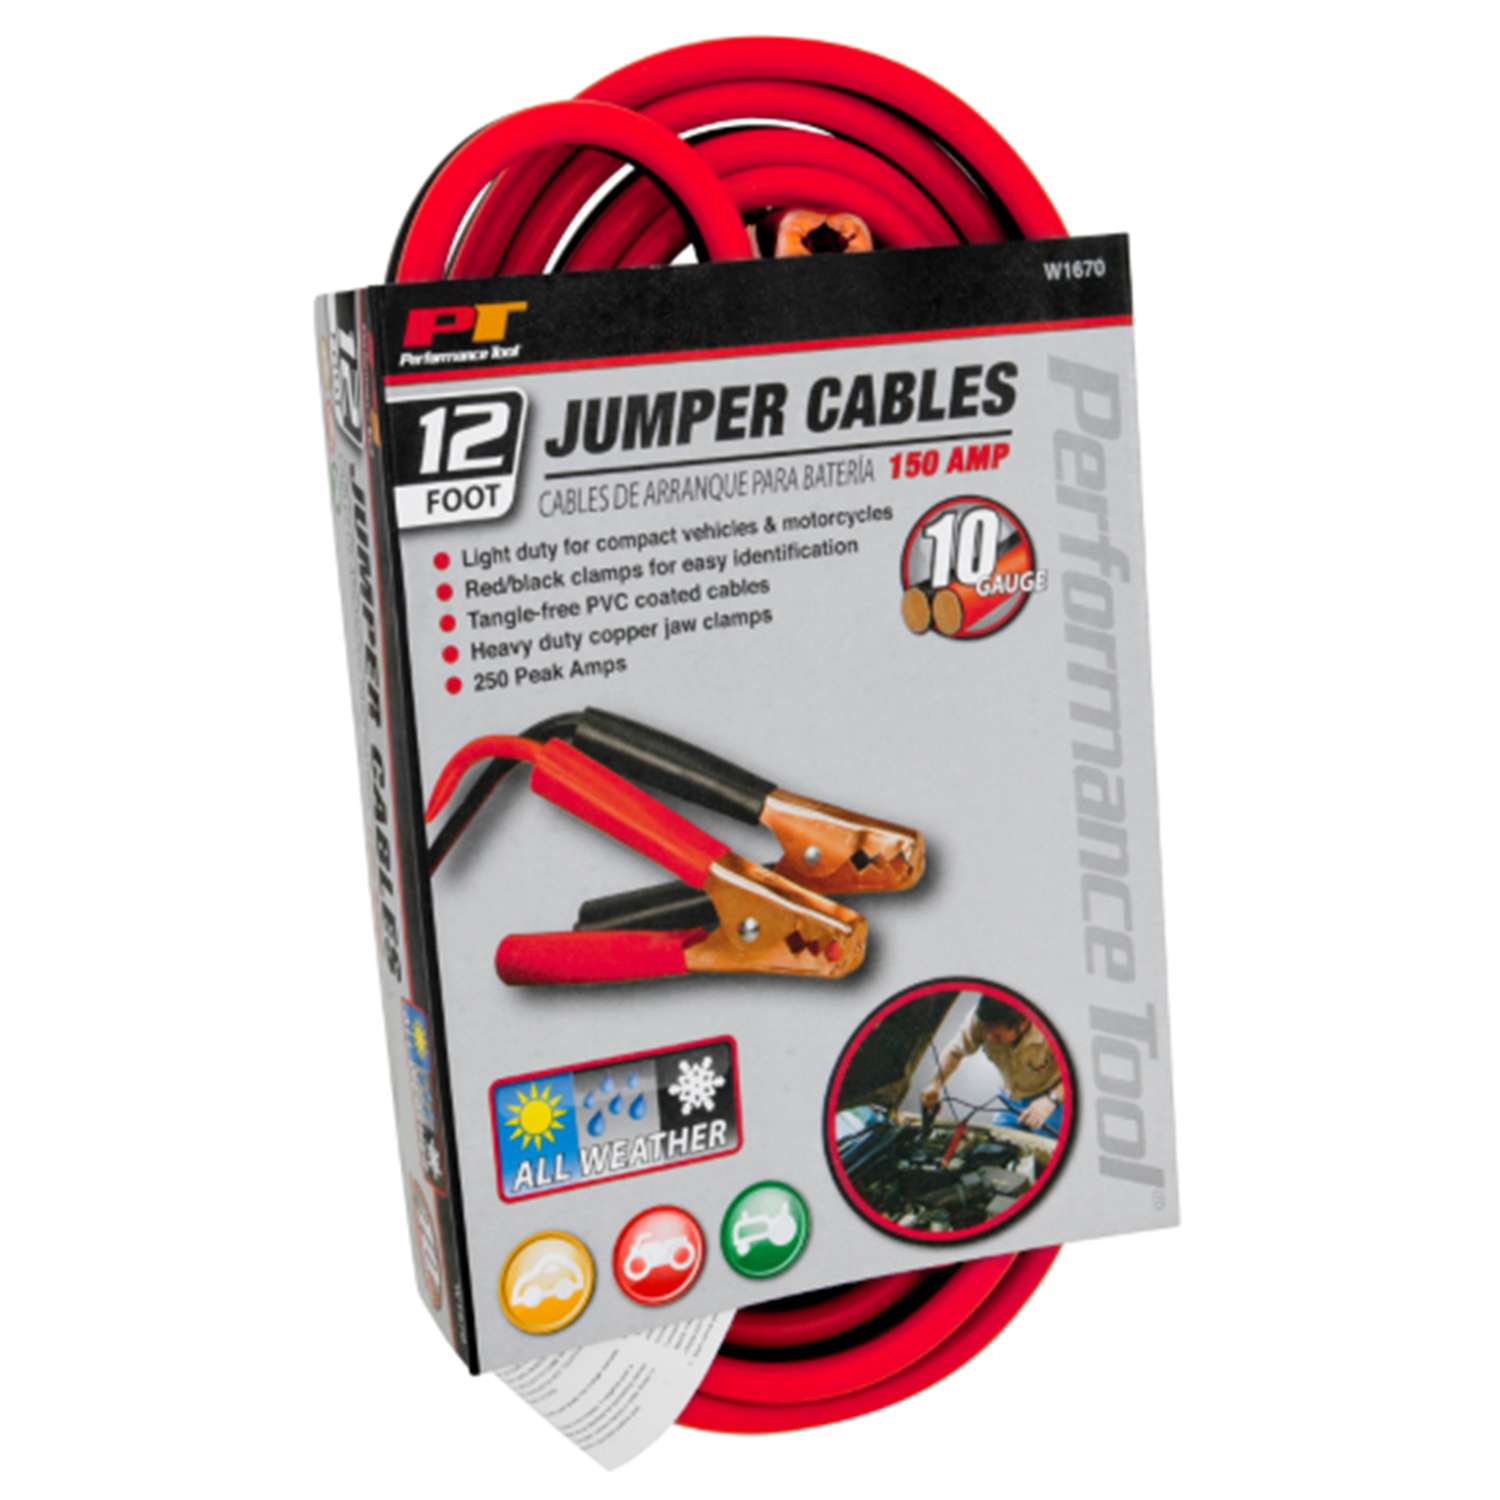 Performance Tool Jumper Cables, 10 Gauge, 150 Amp, 12 Foot